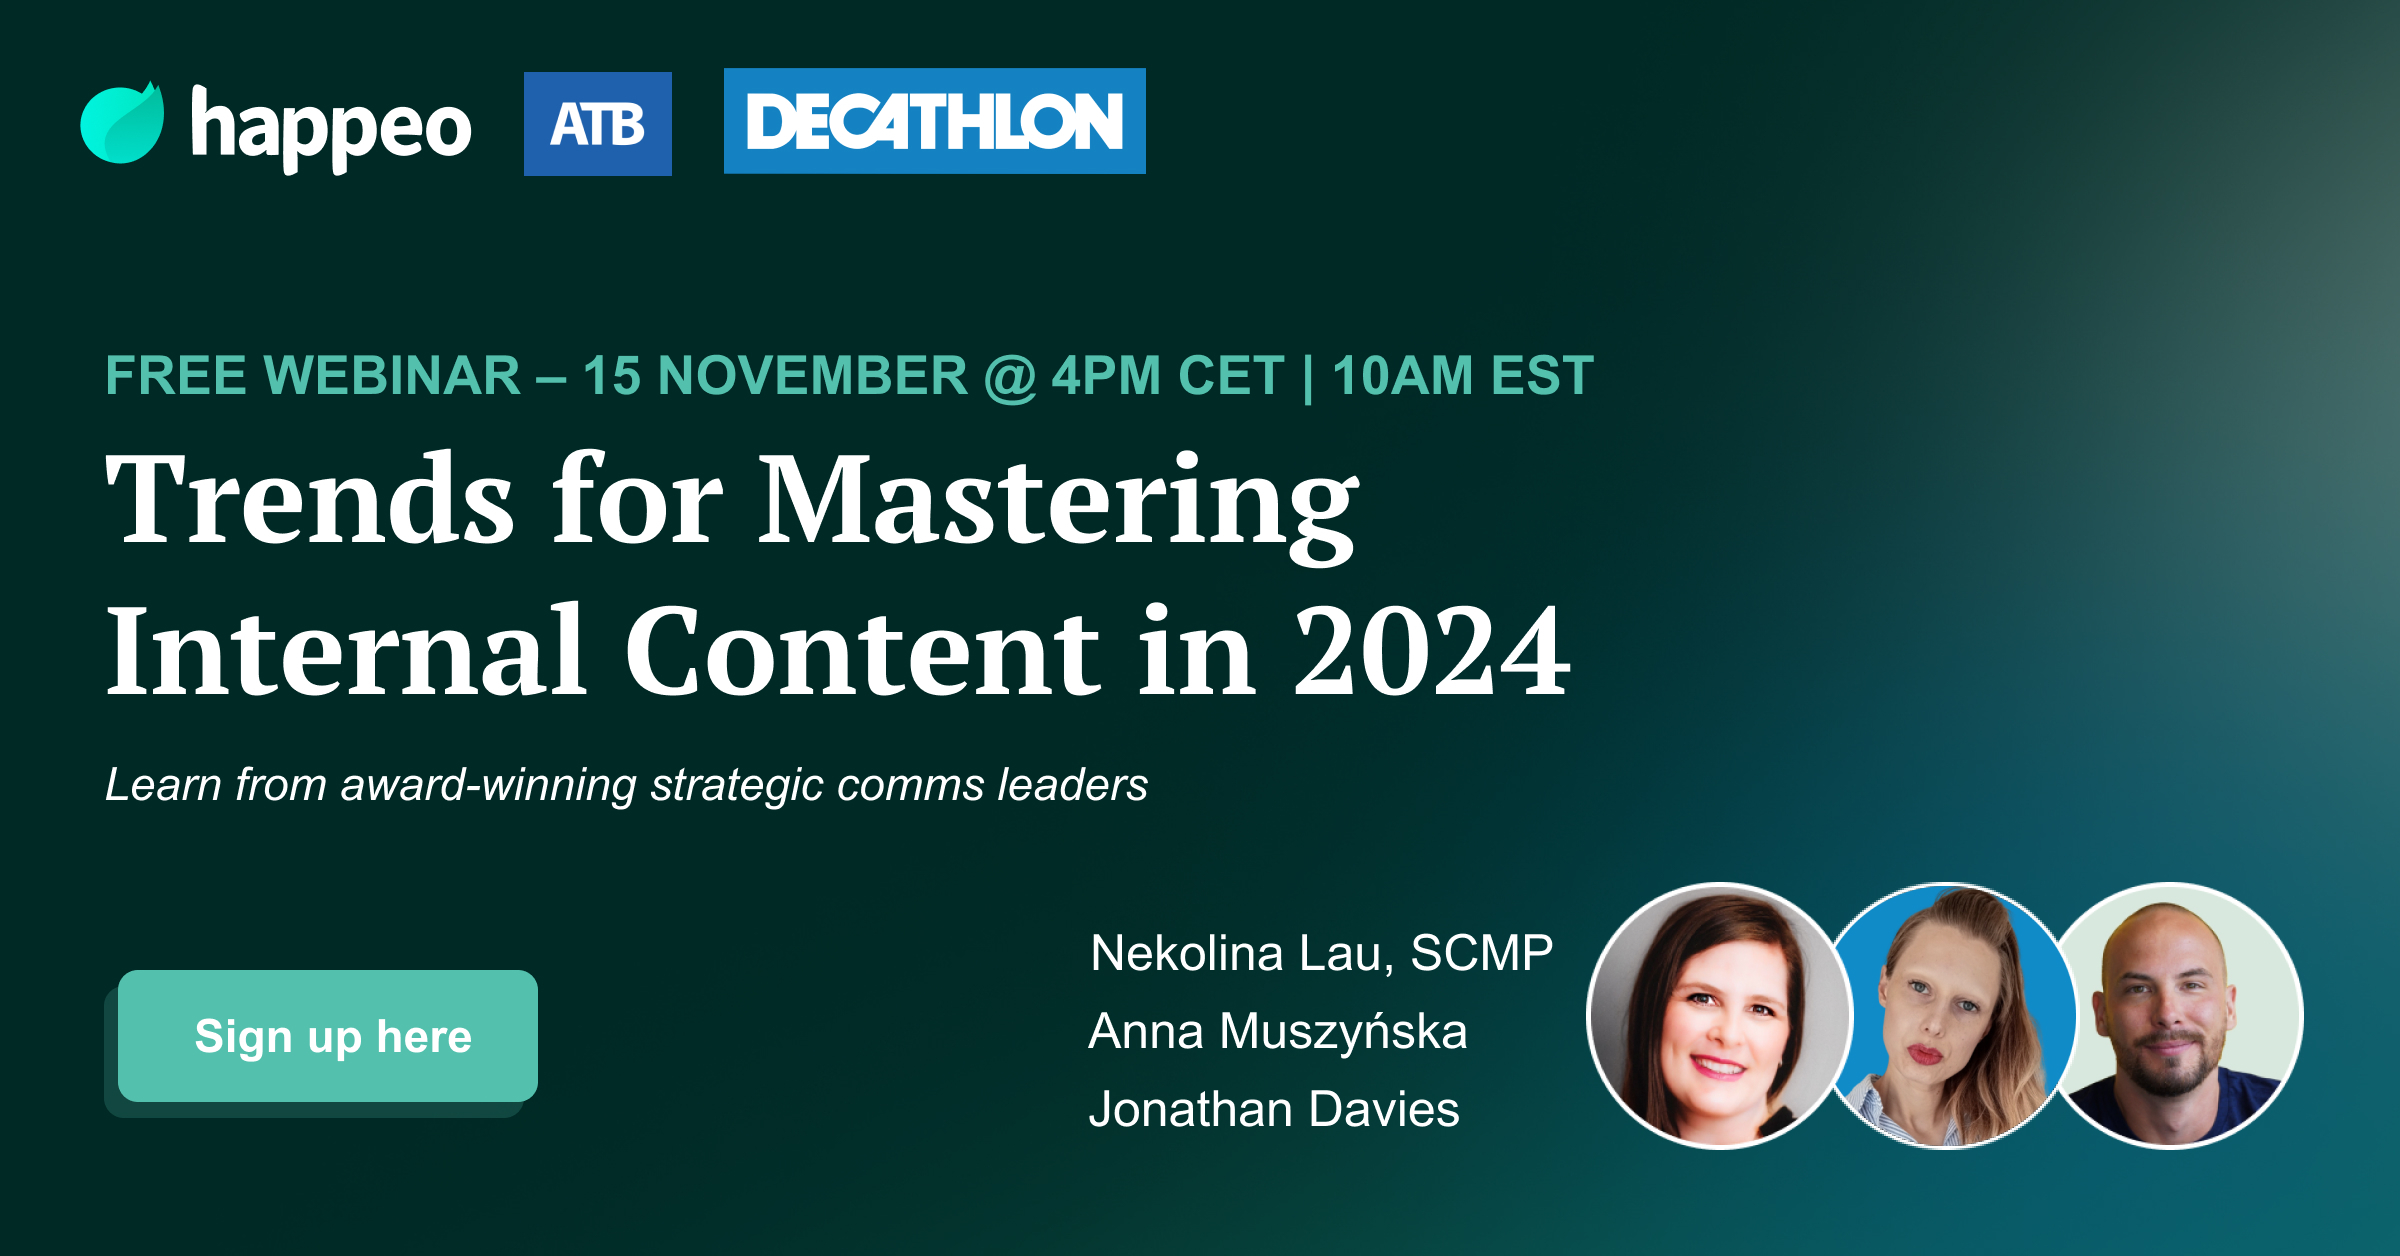 Trends for Mastering Internal Content in 2024